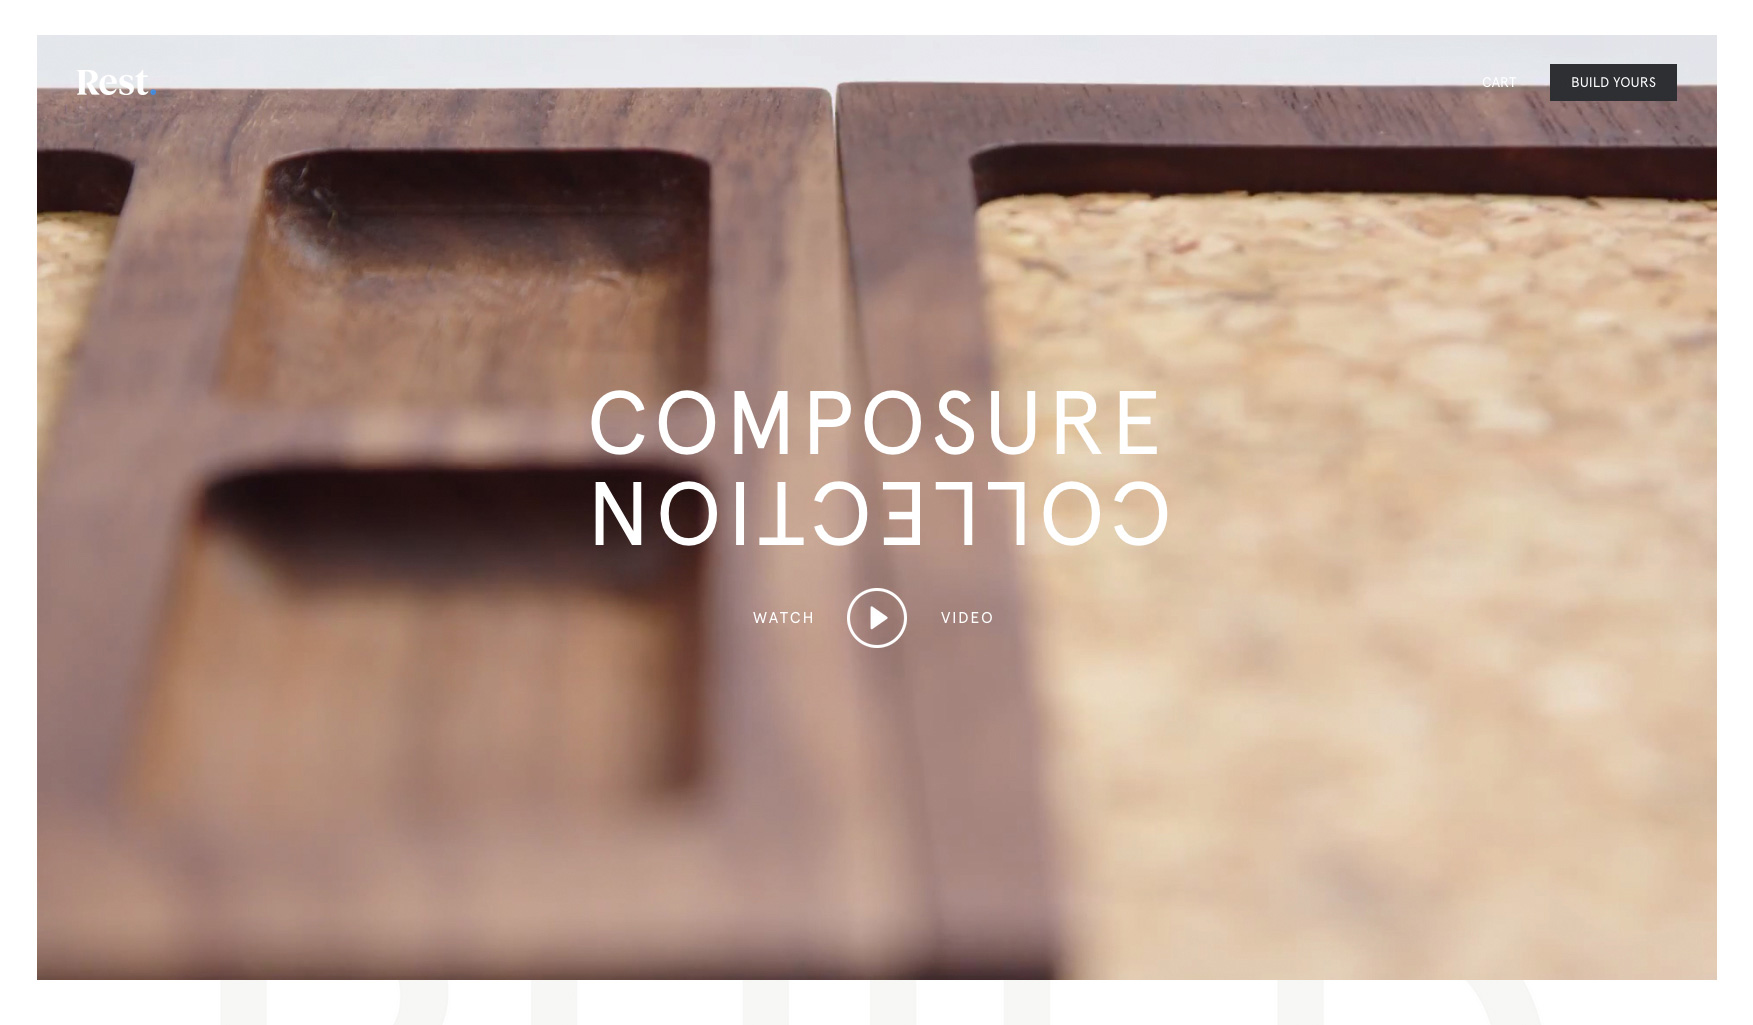 Composure Collection by Rest